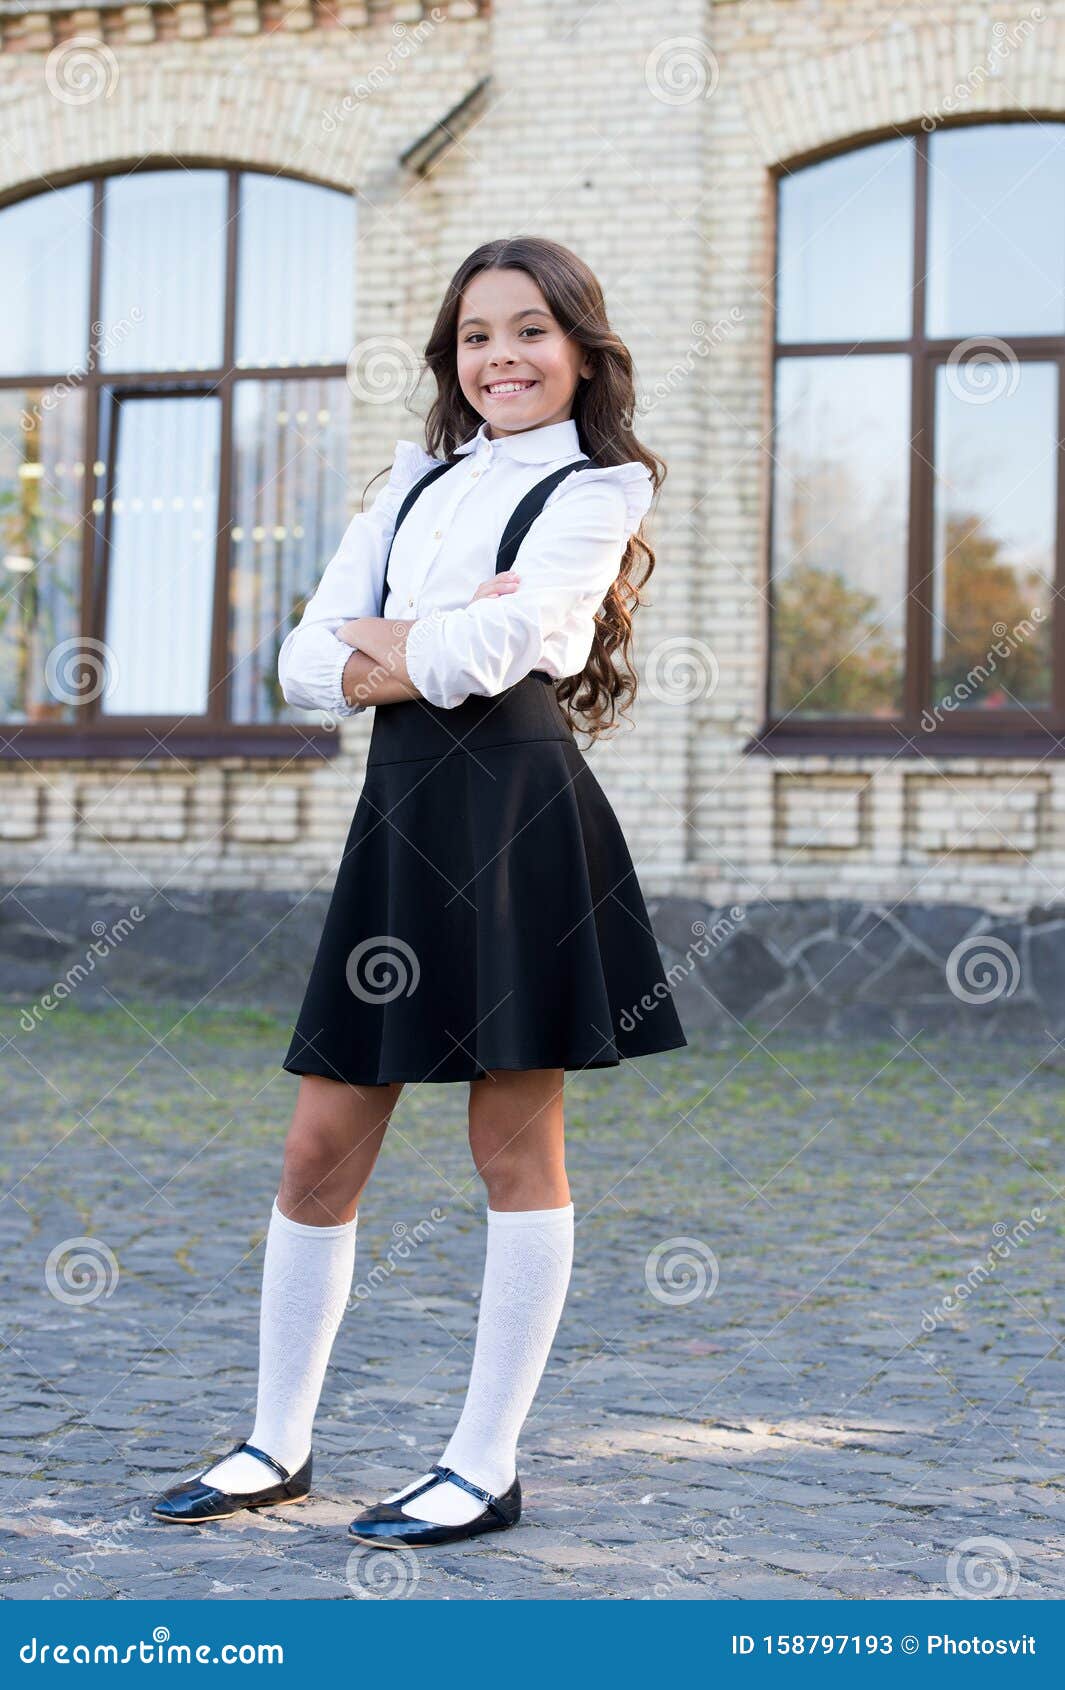 Daily Outfit. Adorable Schoolgirl. Perfect Matching Clothes. Kids Clothes.  School Fashion Stock Image - Image of beauty, adorable: 158797193